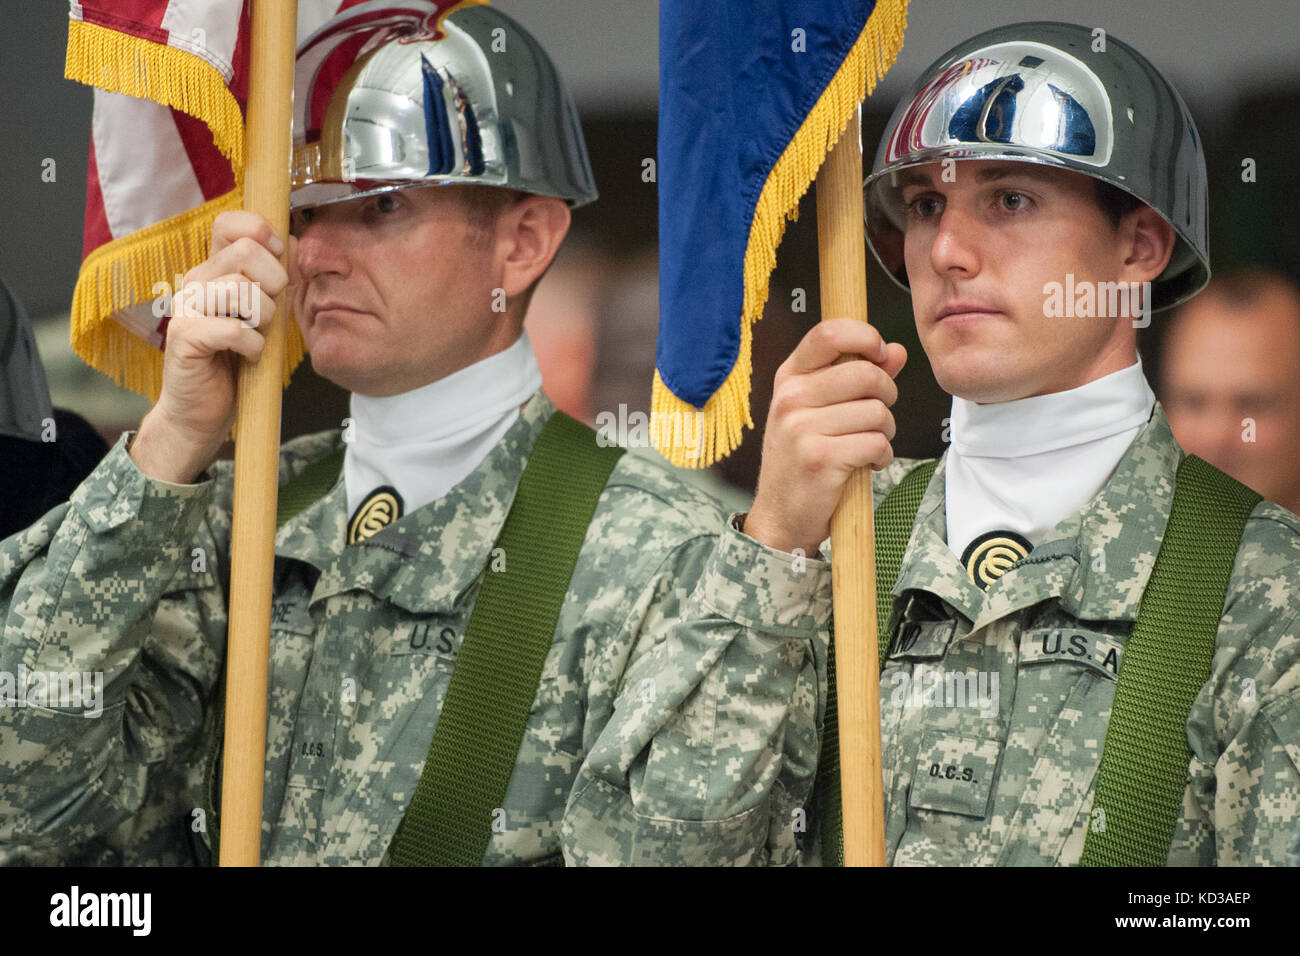 The S.C. Army National Guard’s 218th Leadership Regiment held its change of command ceremony Aug. 1, 2015, at McCrady Training Center, Eastover, S.C., to honor outgoing commander, U.S. Army Col. James R. Finley, and incoming commander, U.S. Army Lt. Col. Renita L. Berry.  Lt. Col. Berry’s distinguished 28-year military career includes deployments in support of Operation Joint Guard, Bosnia and Operation Joint Guardian, Kosovo. (U.S. Army National Guard photo by Sgt. Brian Calhoun/Released) Stock Photo